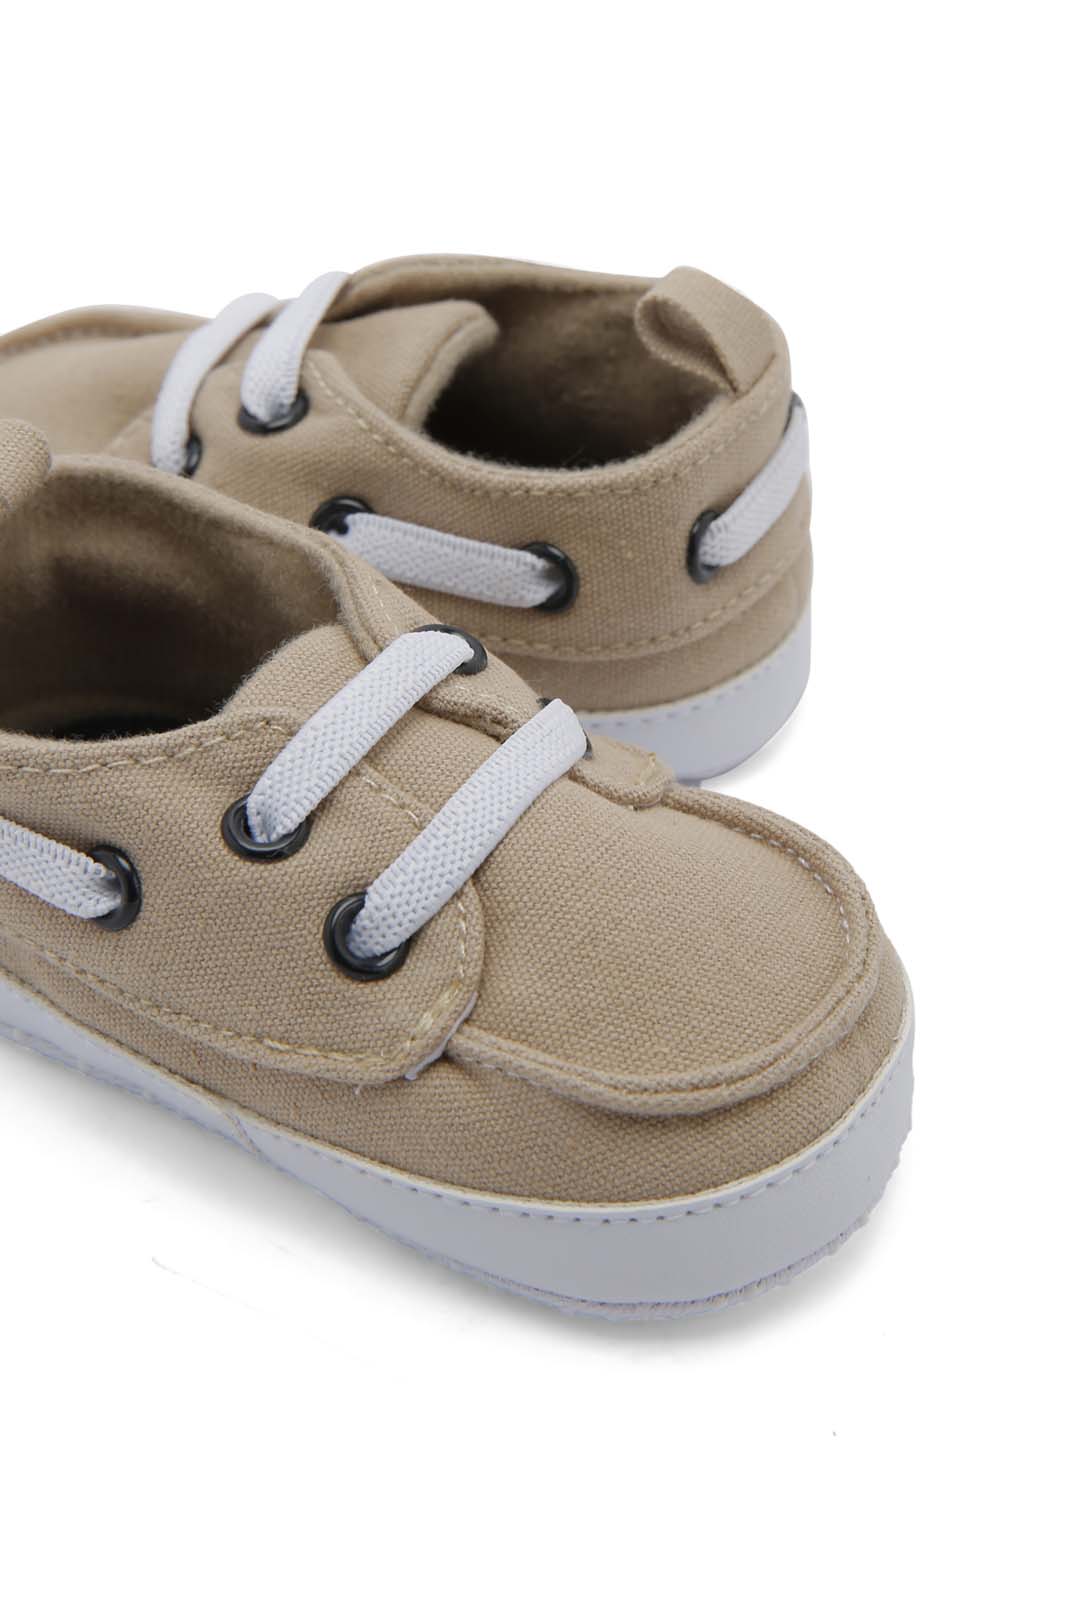 Redtag-Beige-Pram-Shoe-Category:Shoes,-Colour:Beige,-Deals:New-In,-Dept:New-Born,-Filter:Baby-Footwear-(0-to-18-Mths),-NBF-Shoes,-New-In-NBF-FOO,-Non-Sale,-Section:Boys-(0-to-14Yrs),-W22B-Baby-0 to 18 Months